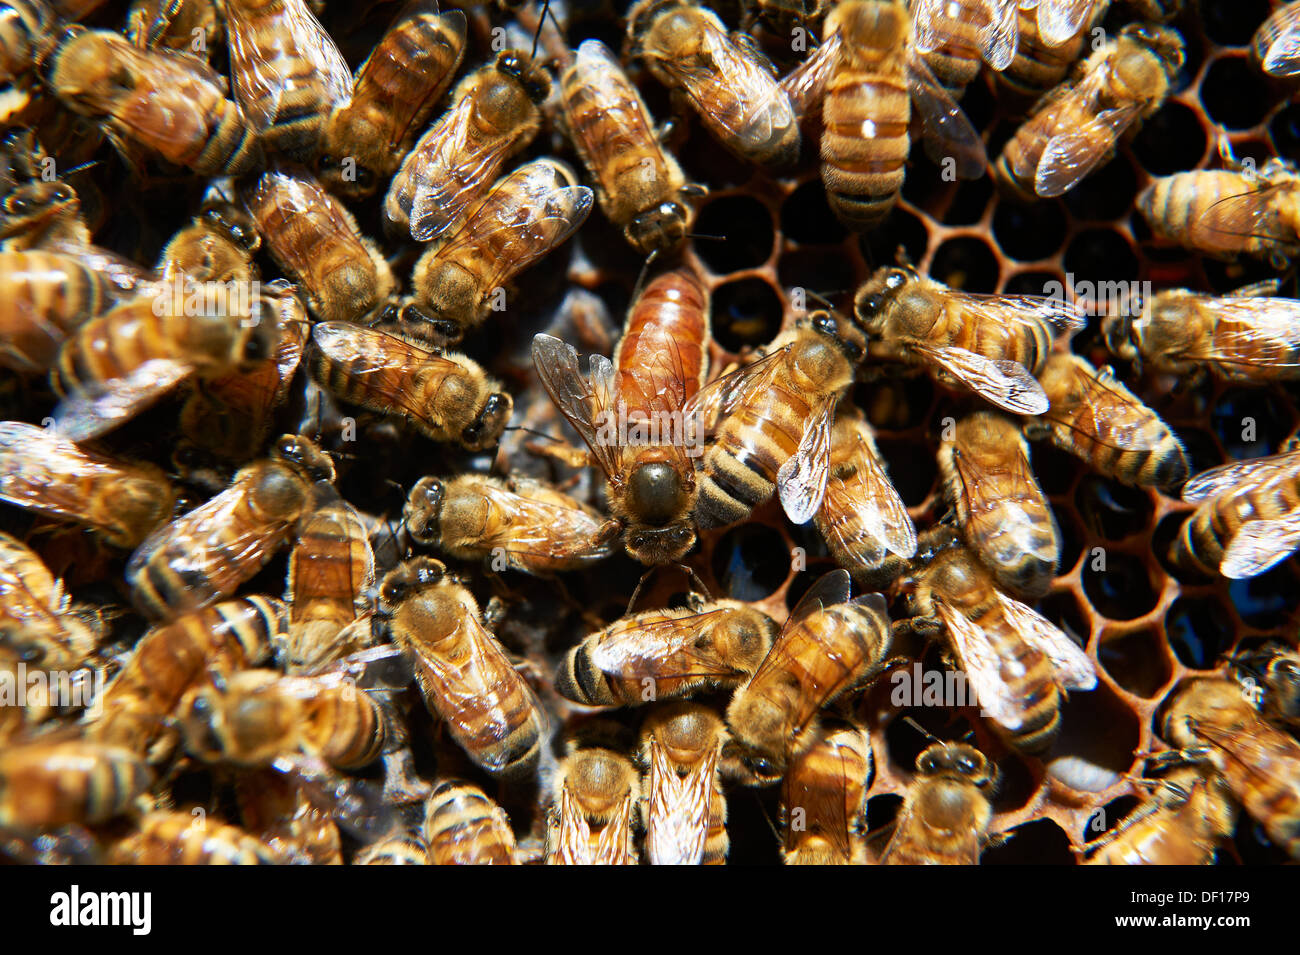 Queen bee in the center centre of the frame surrounded by worker bee's Stock Photo